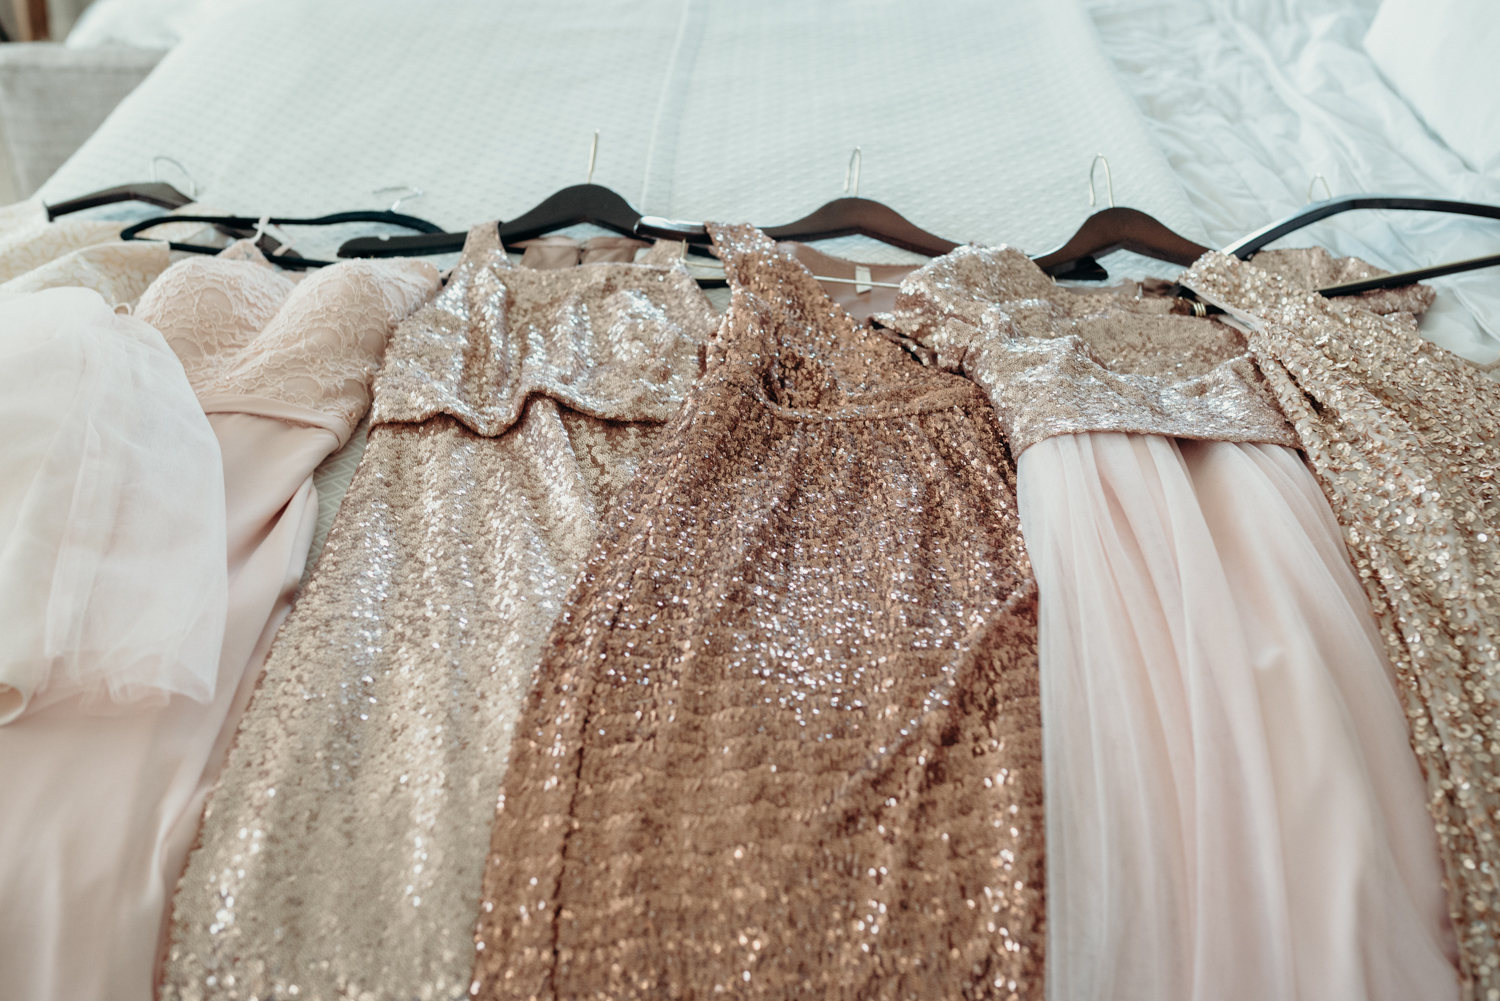 A slew of sparkly bridesmaids dresses wait on the bed before a wedding at Lansdowne Resort.